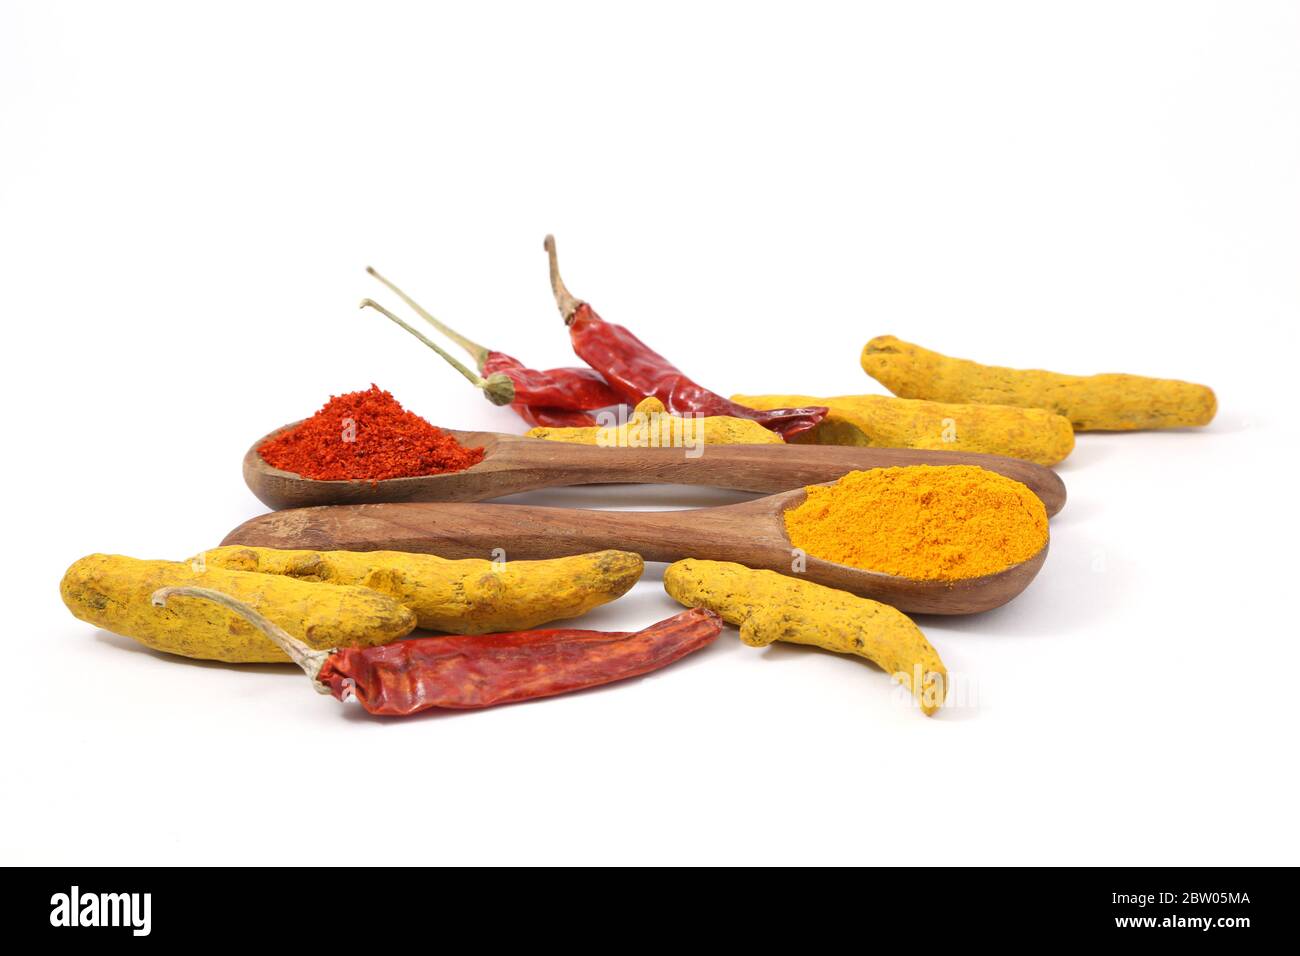 Turmeric and chili powder or spices on white background. Stock Photo